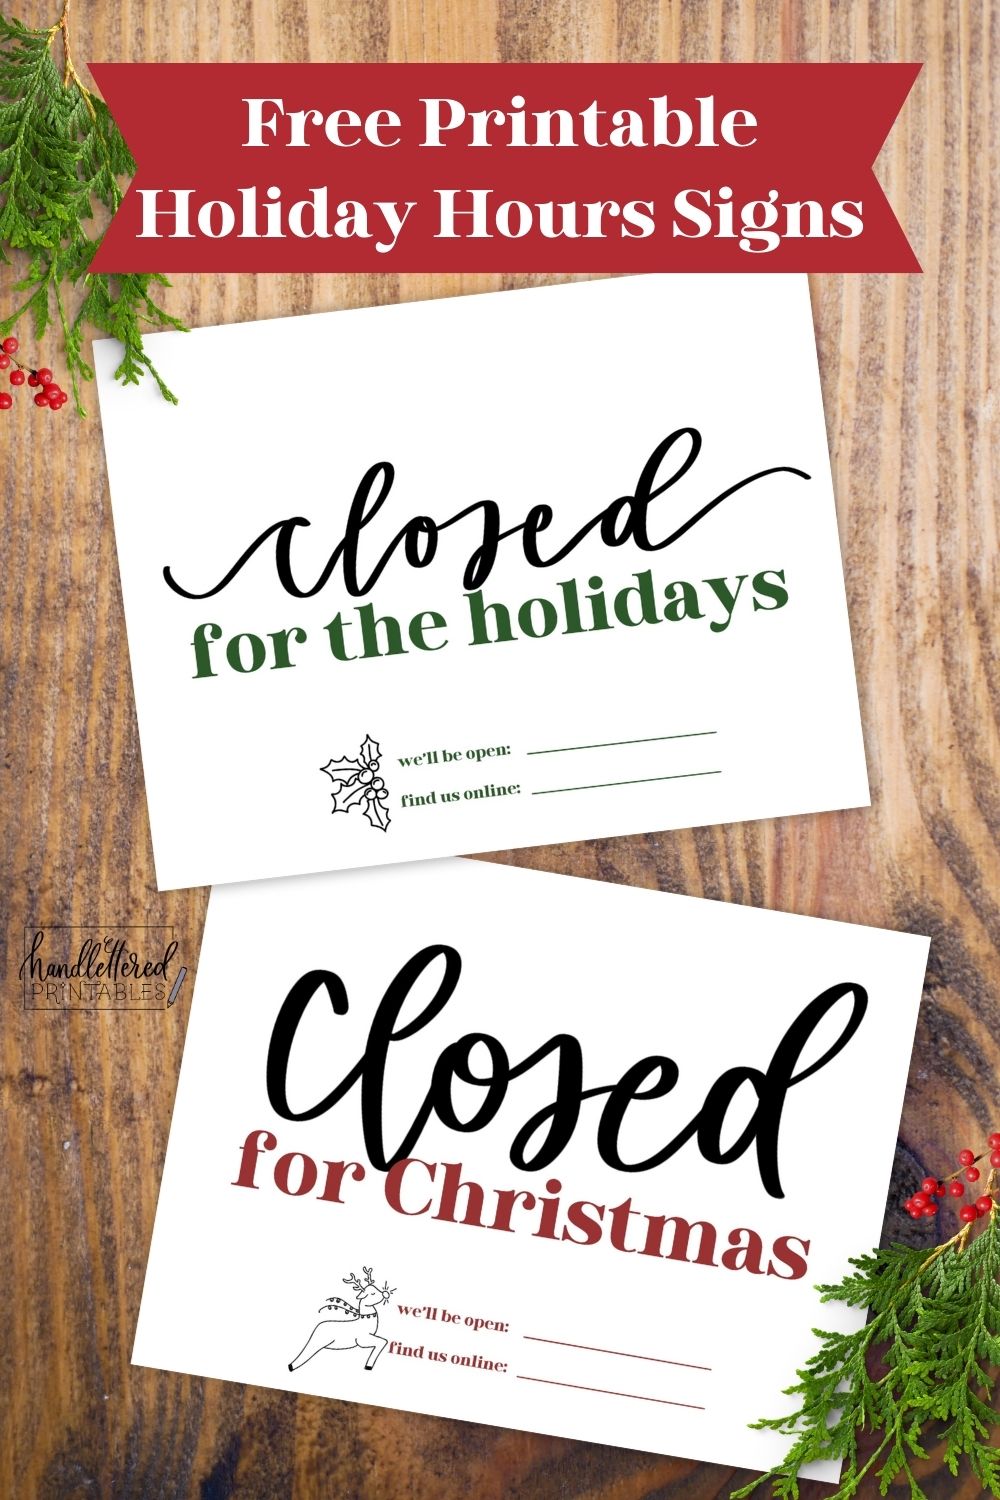 free printable closed signs for small businesses